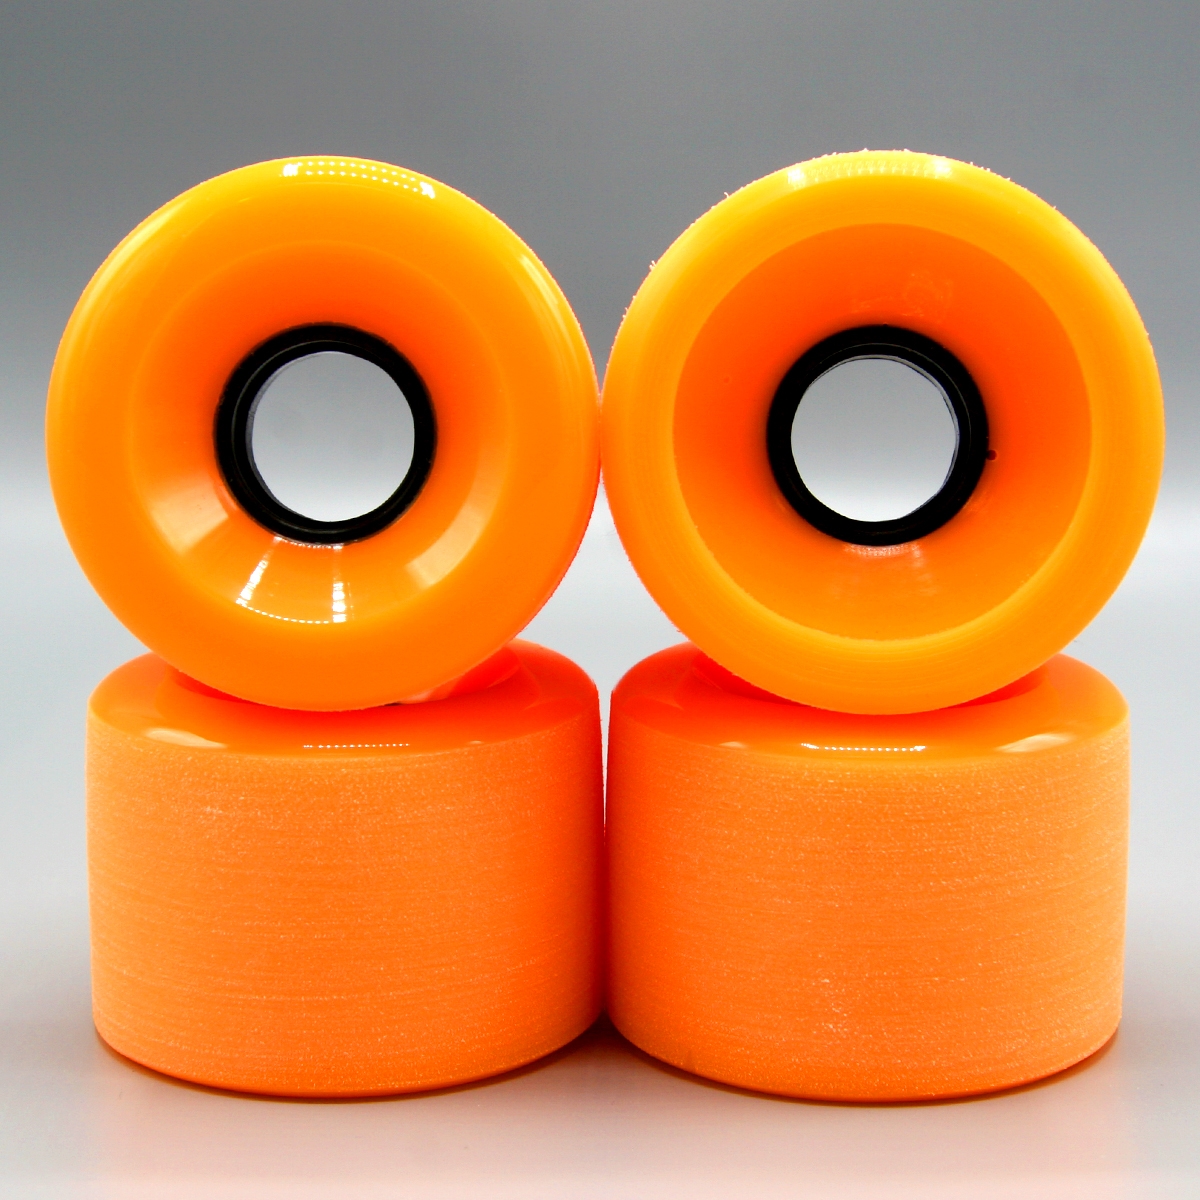 Blank 65mm (Solid Orange) - Includes 1/4" Risers